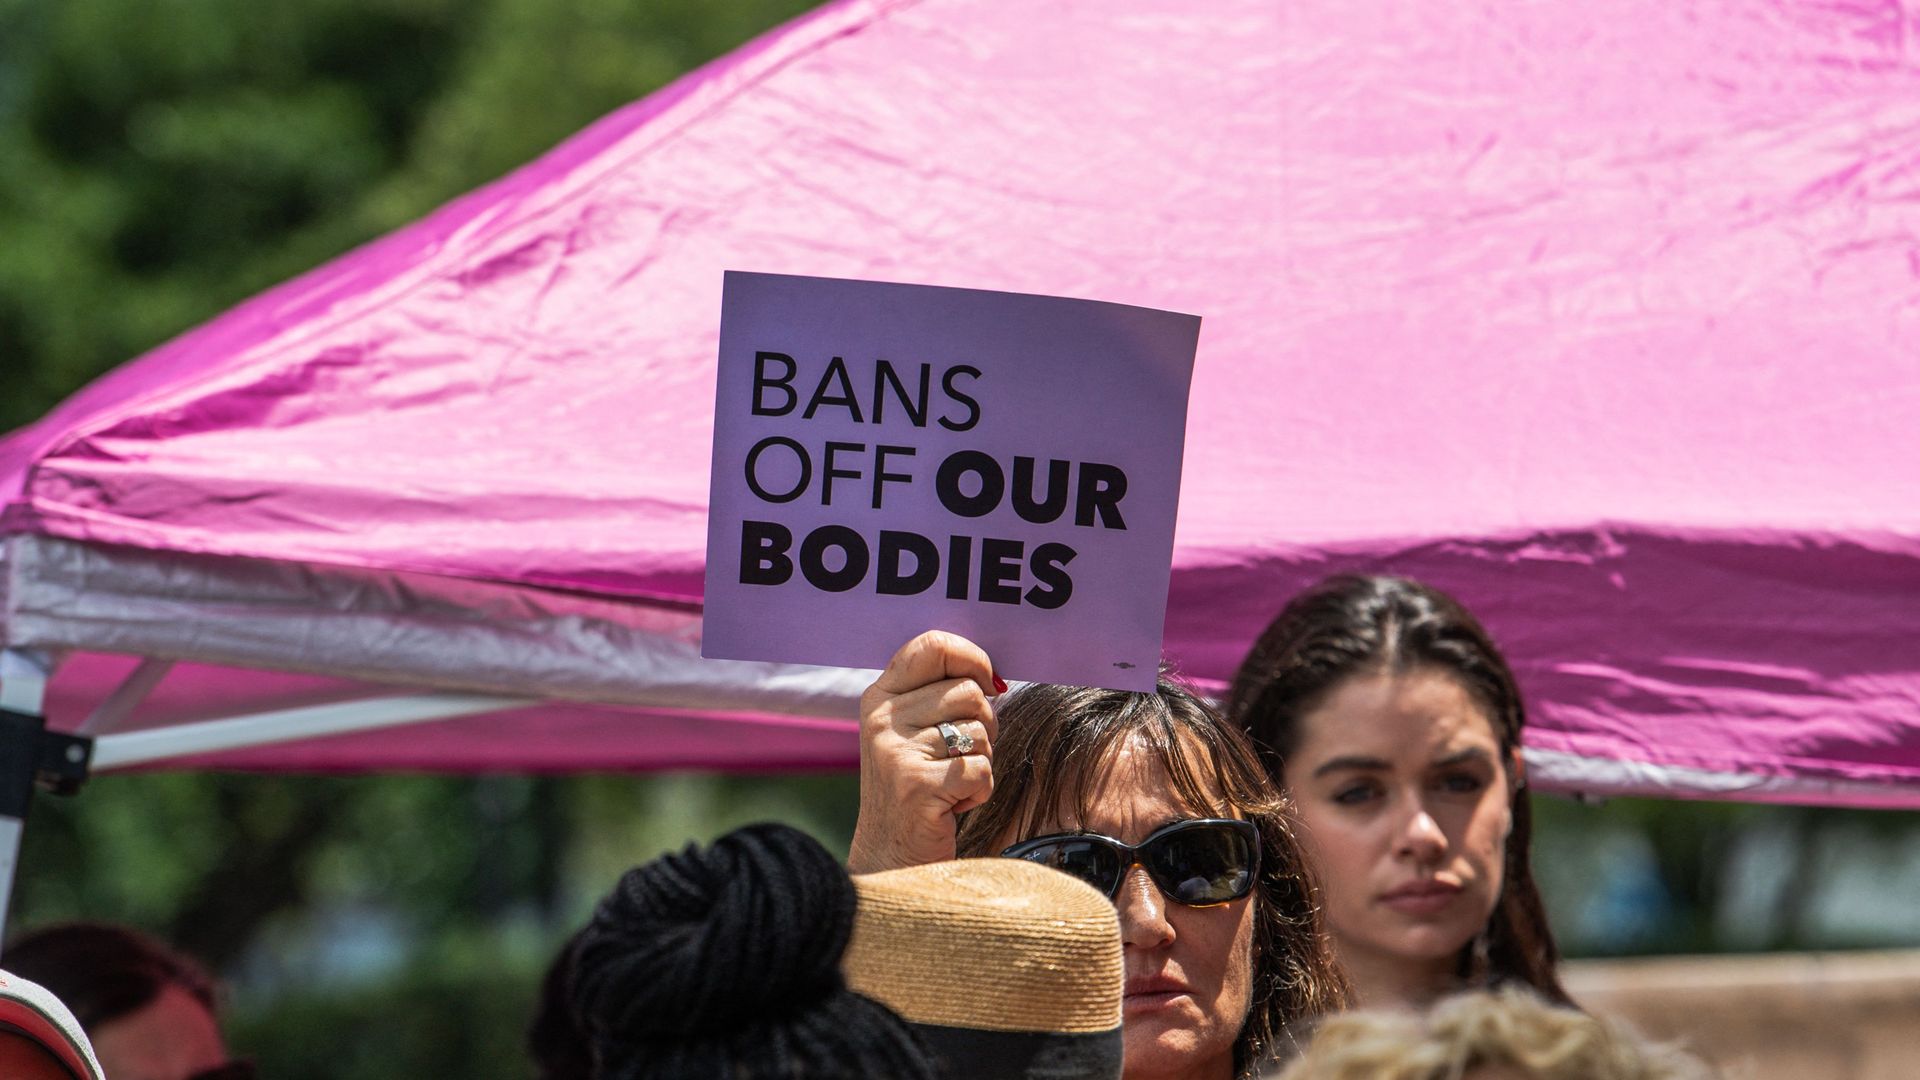 Picture of a sign that says "bans off our bodies"